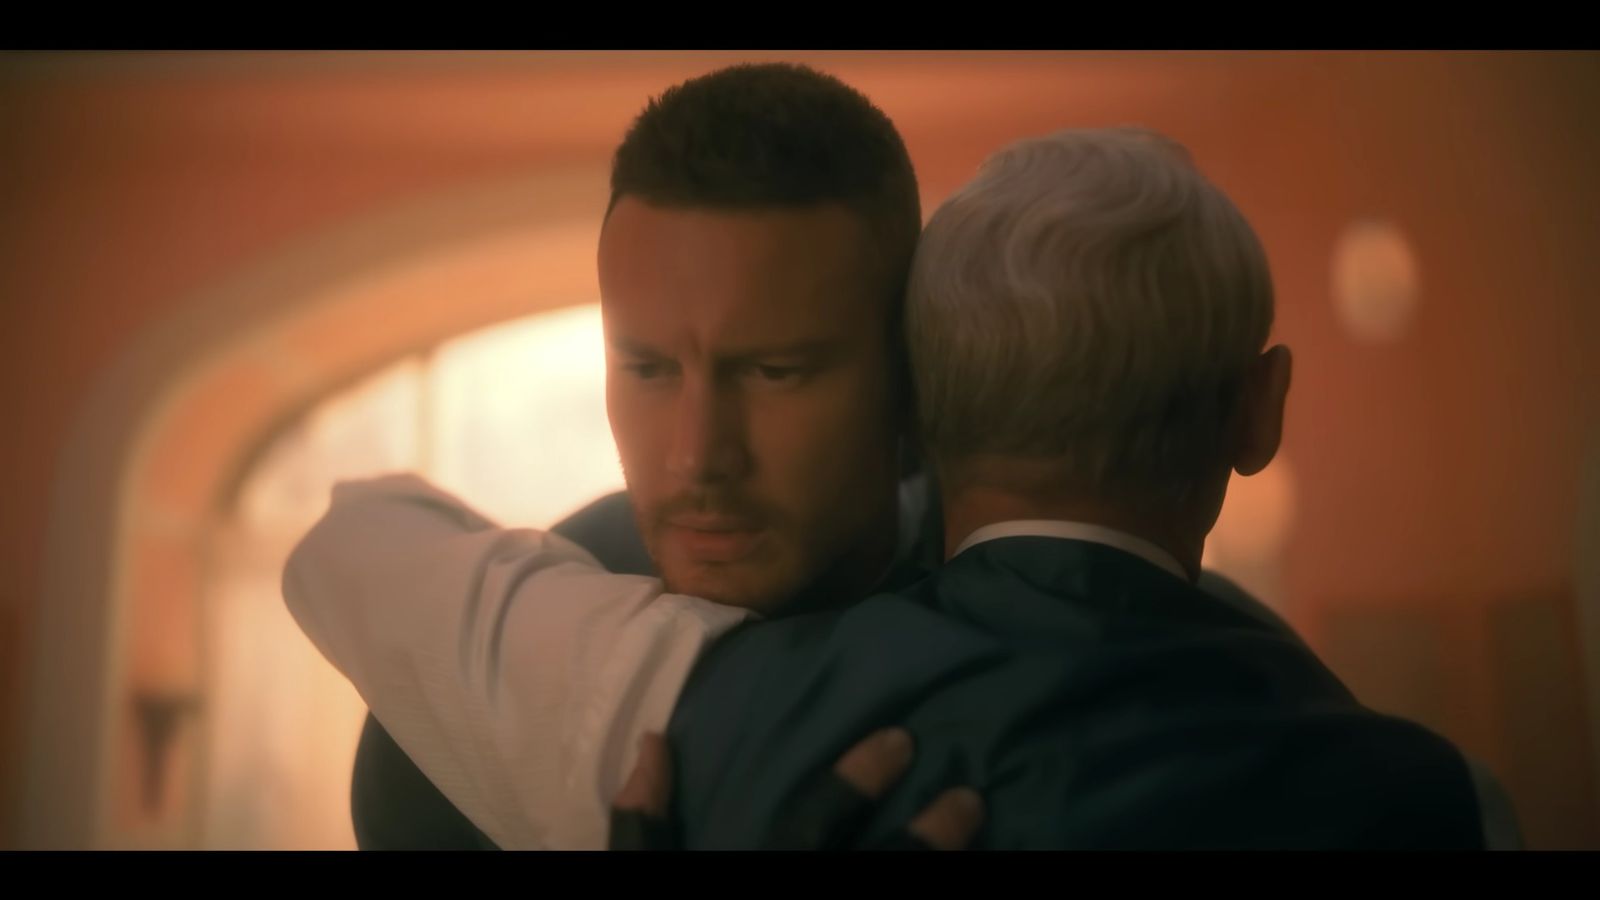 Luther (played by Tom Hopper) hugging Reginald (played by Colm Feore) in The Umbrella Academy Season 3.